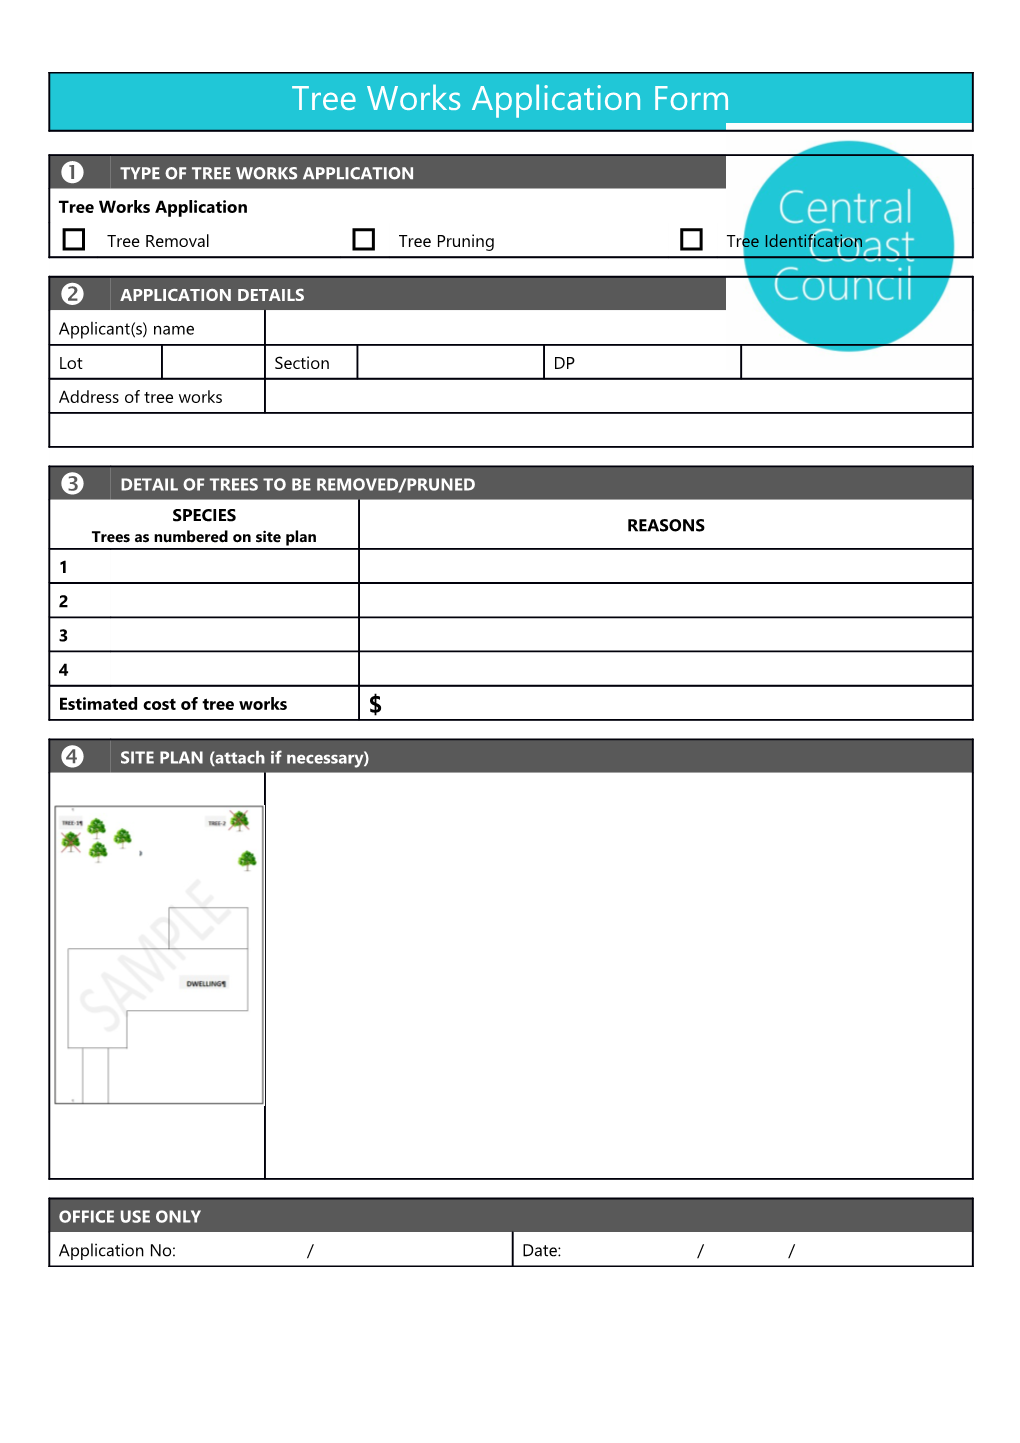 Tree Works Application Form